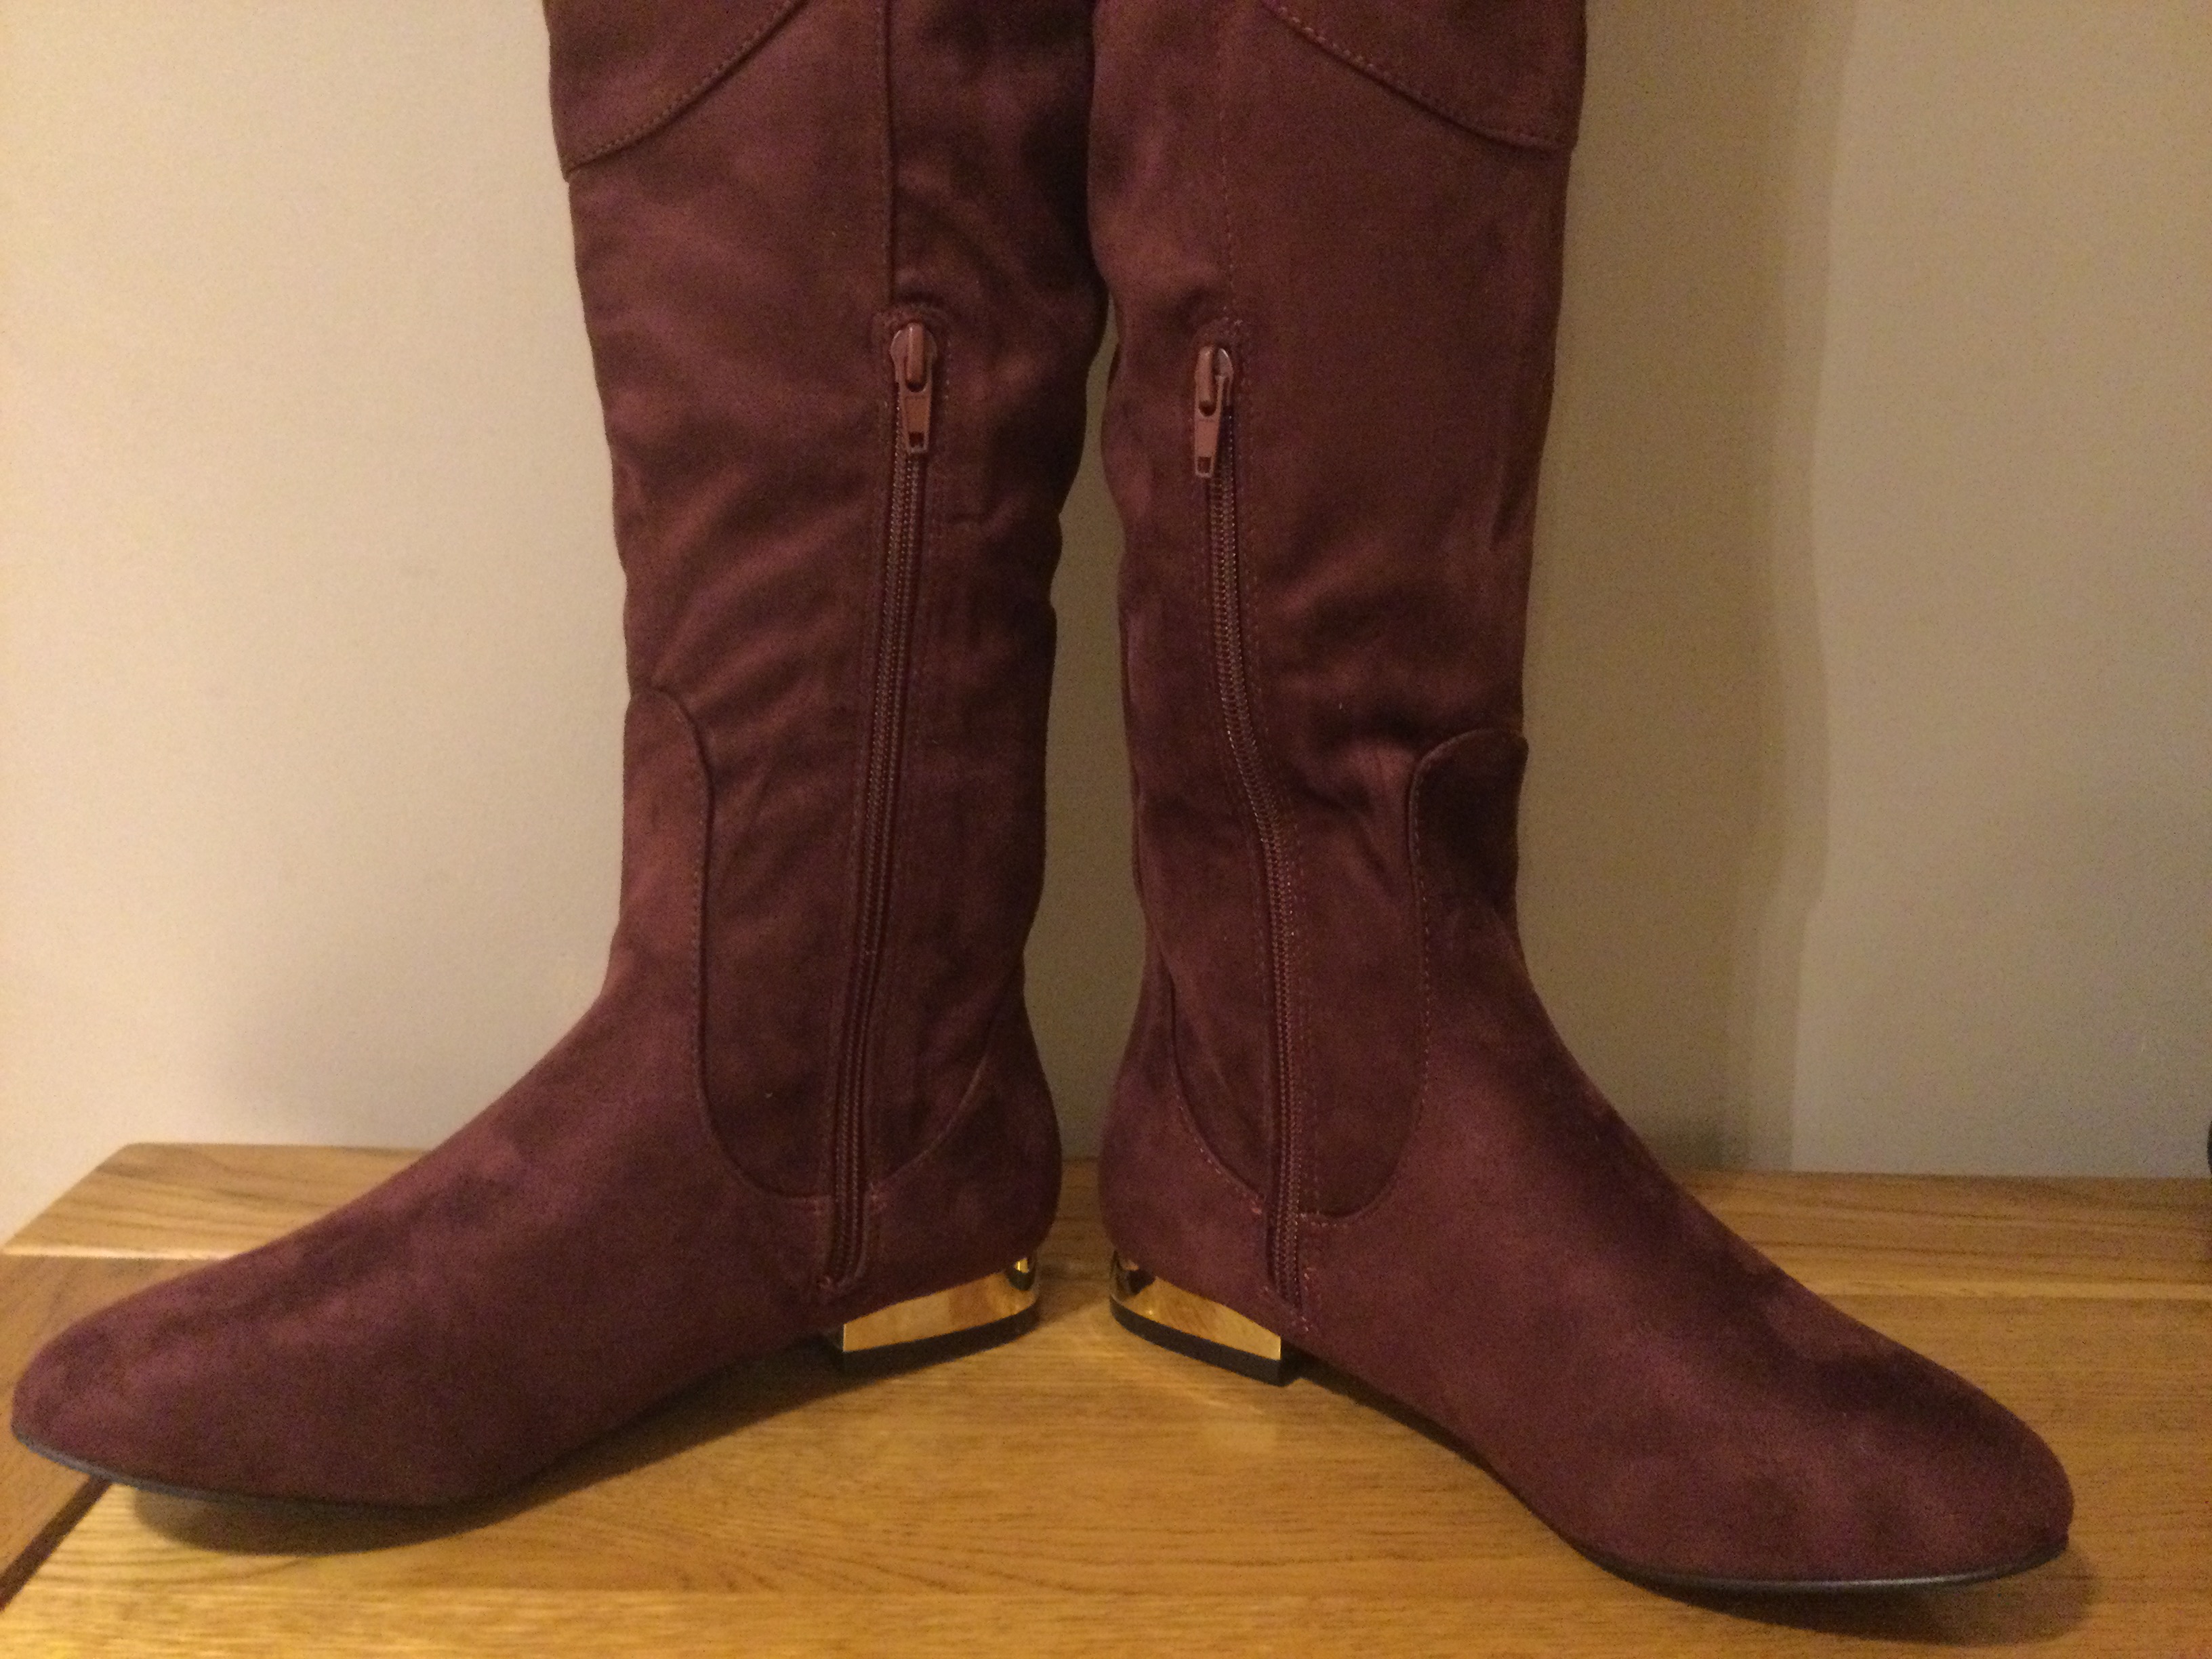 Dolcis “Katie” Long Boots, Low Heel, Size 4, Burgundy - New RRP £55.00 - Image 4 of 7